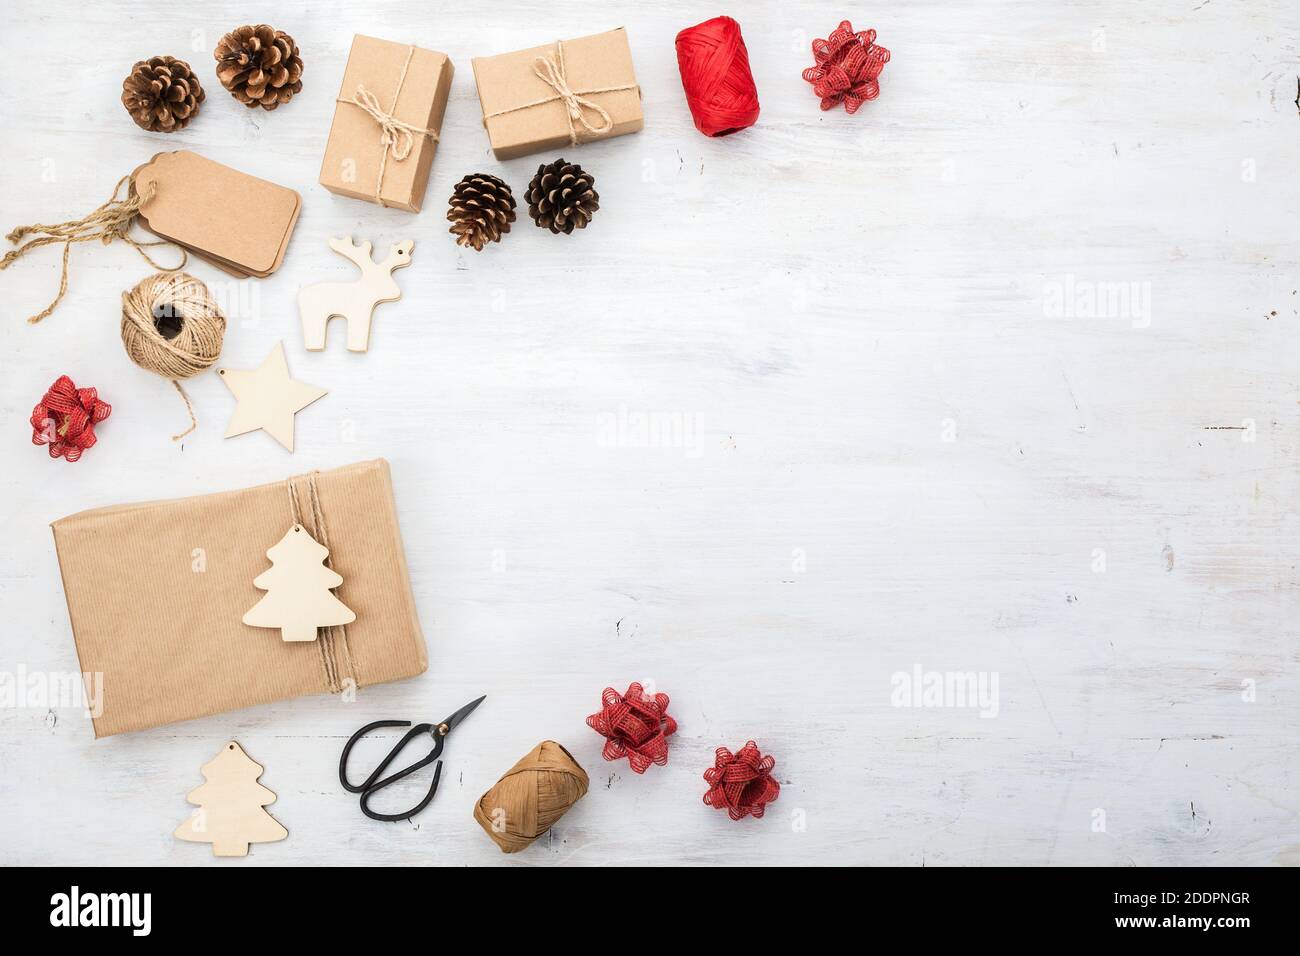 Christmas background, presents in brown boxes on white table Stock Photo